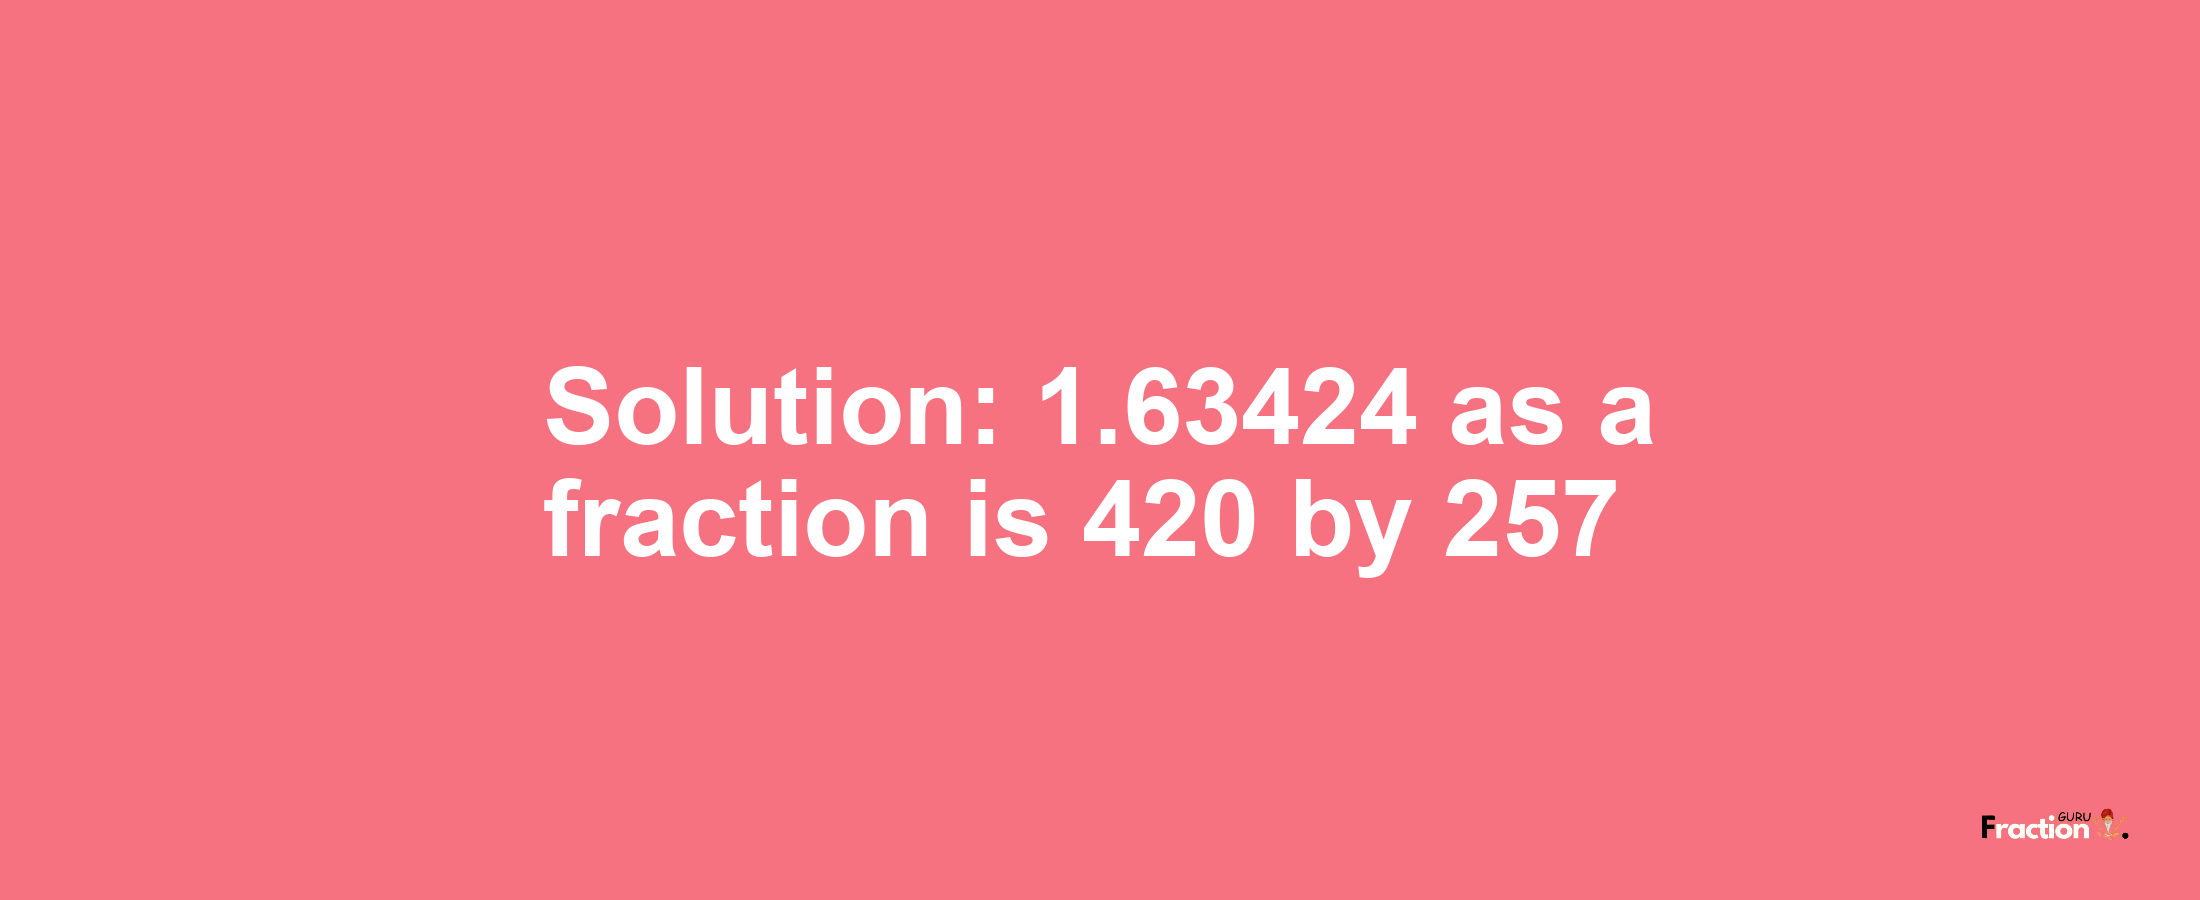 Solution:1.63424 as a fraction is 420/257